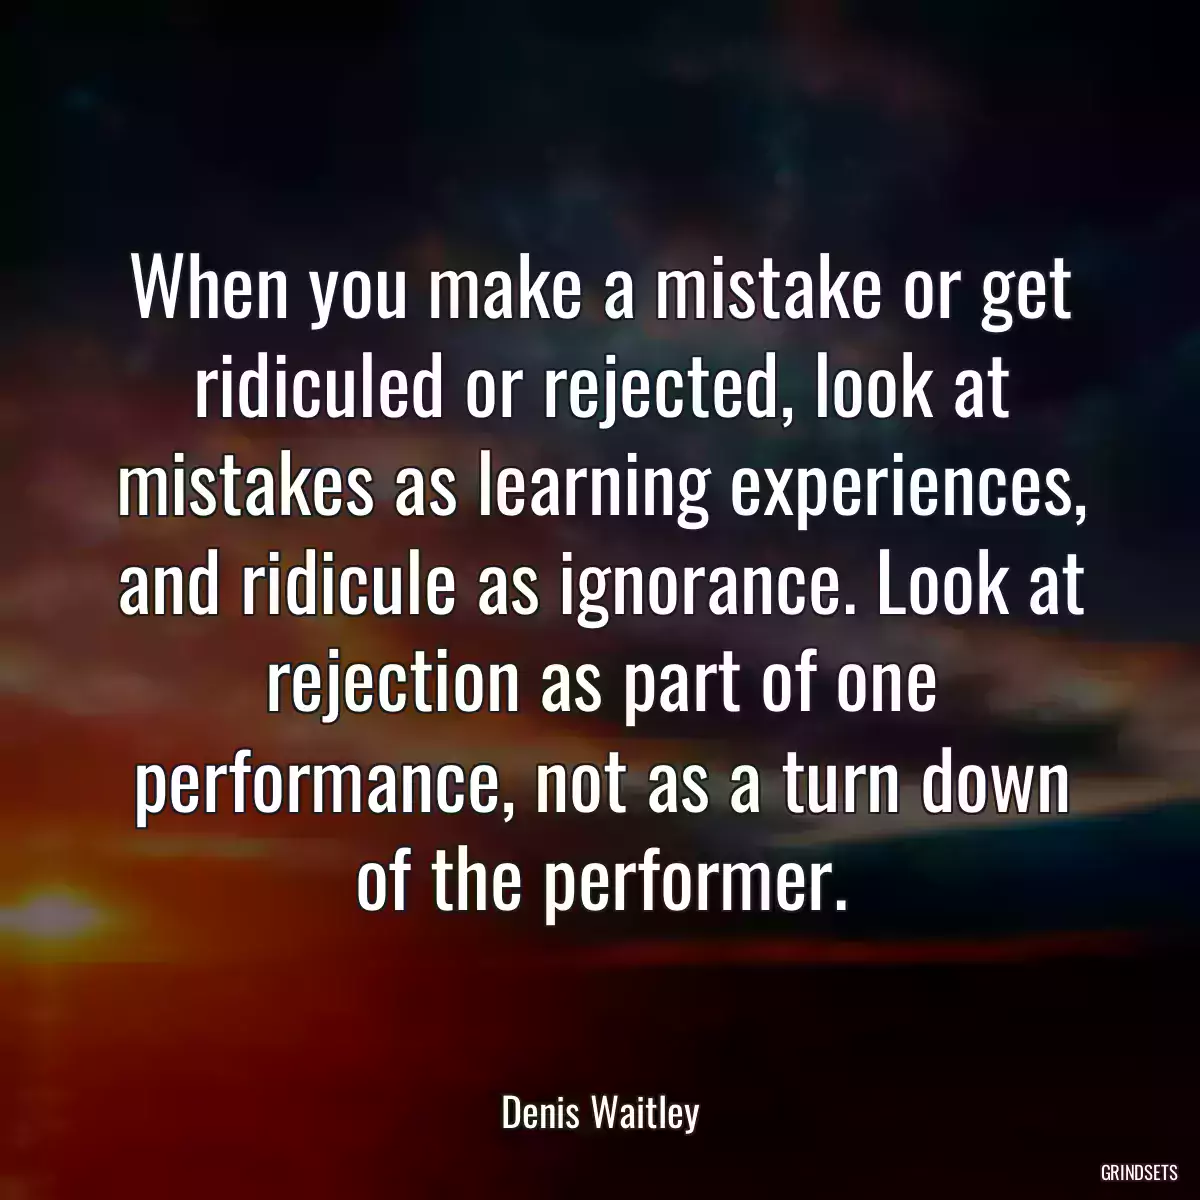 When you make a mistake or get ridiculed or rejected, look at mistakes as learning experiences, and ridicule as ignorance. Look at rejection as part of one performance, not as a turn down of the performer.